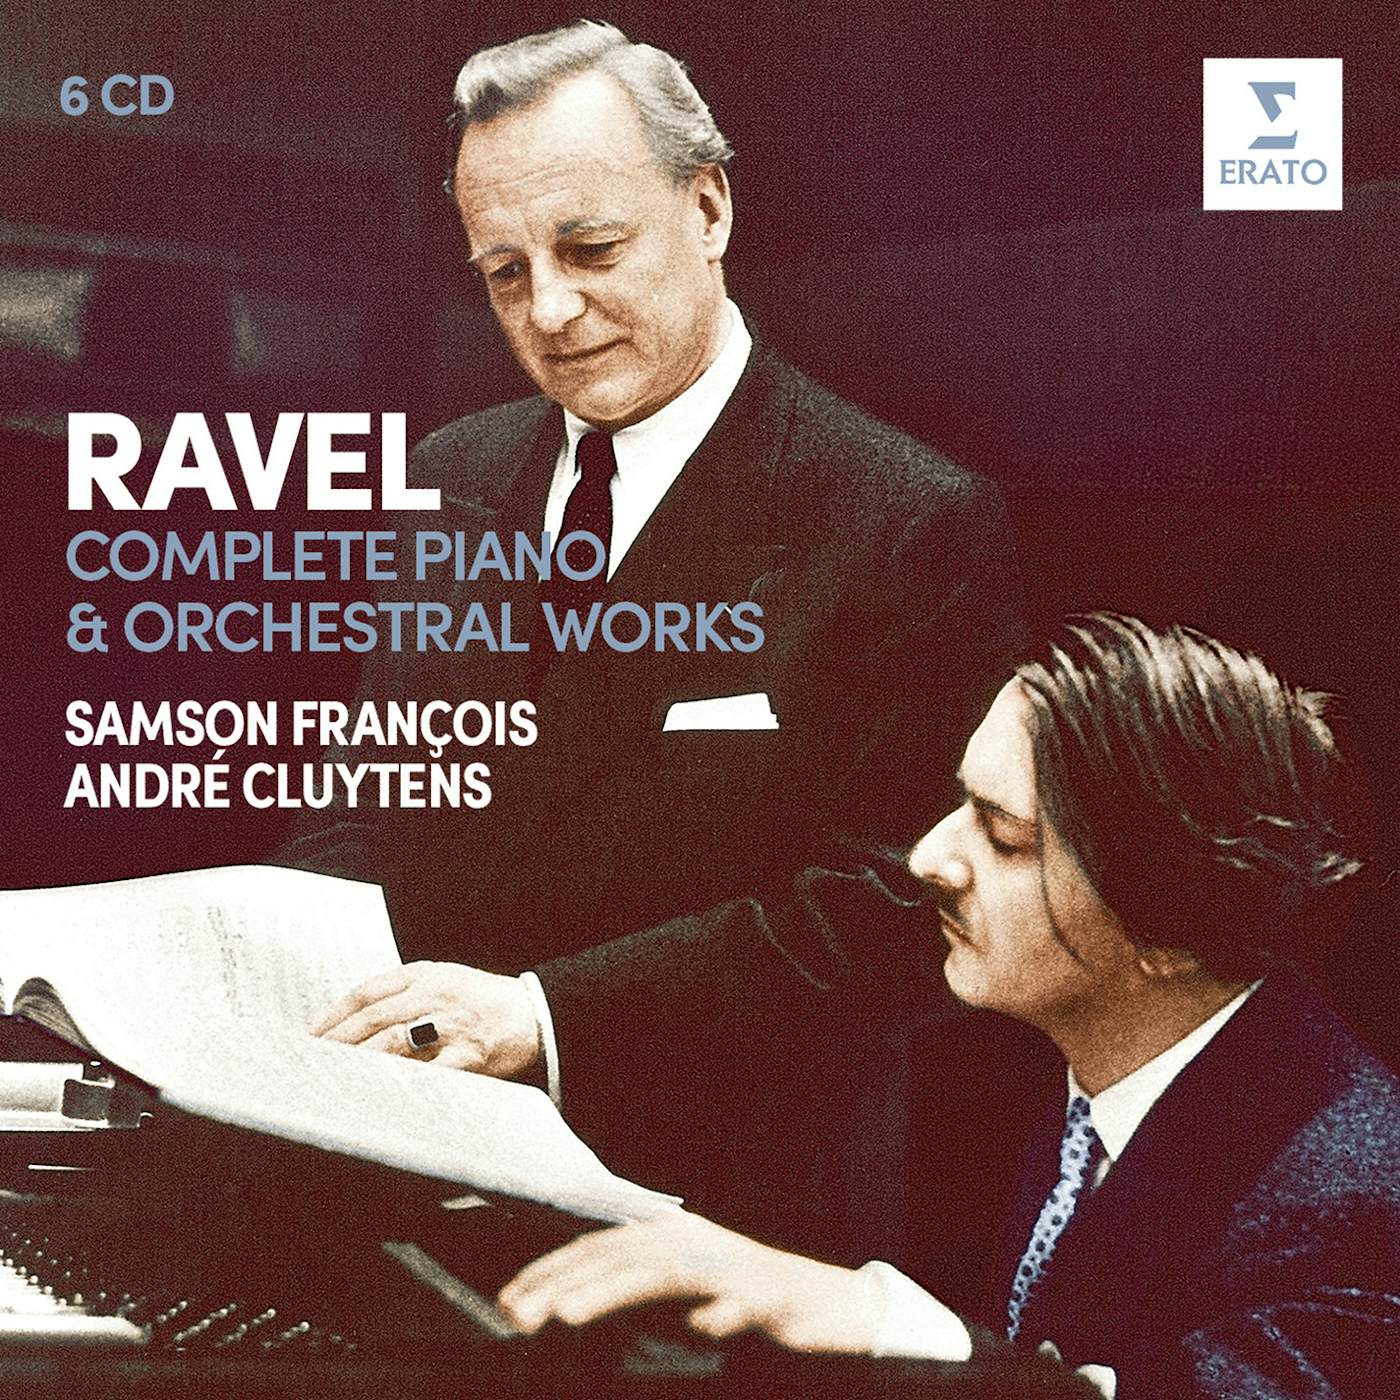 André Cluytens RAVEL: COMPLETE PIANO & ORCHESTRAL WORKS (6CD) CD